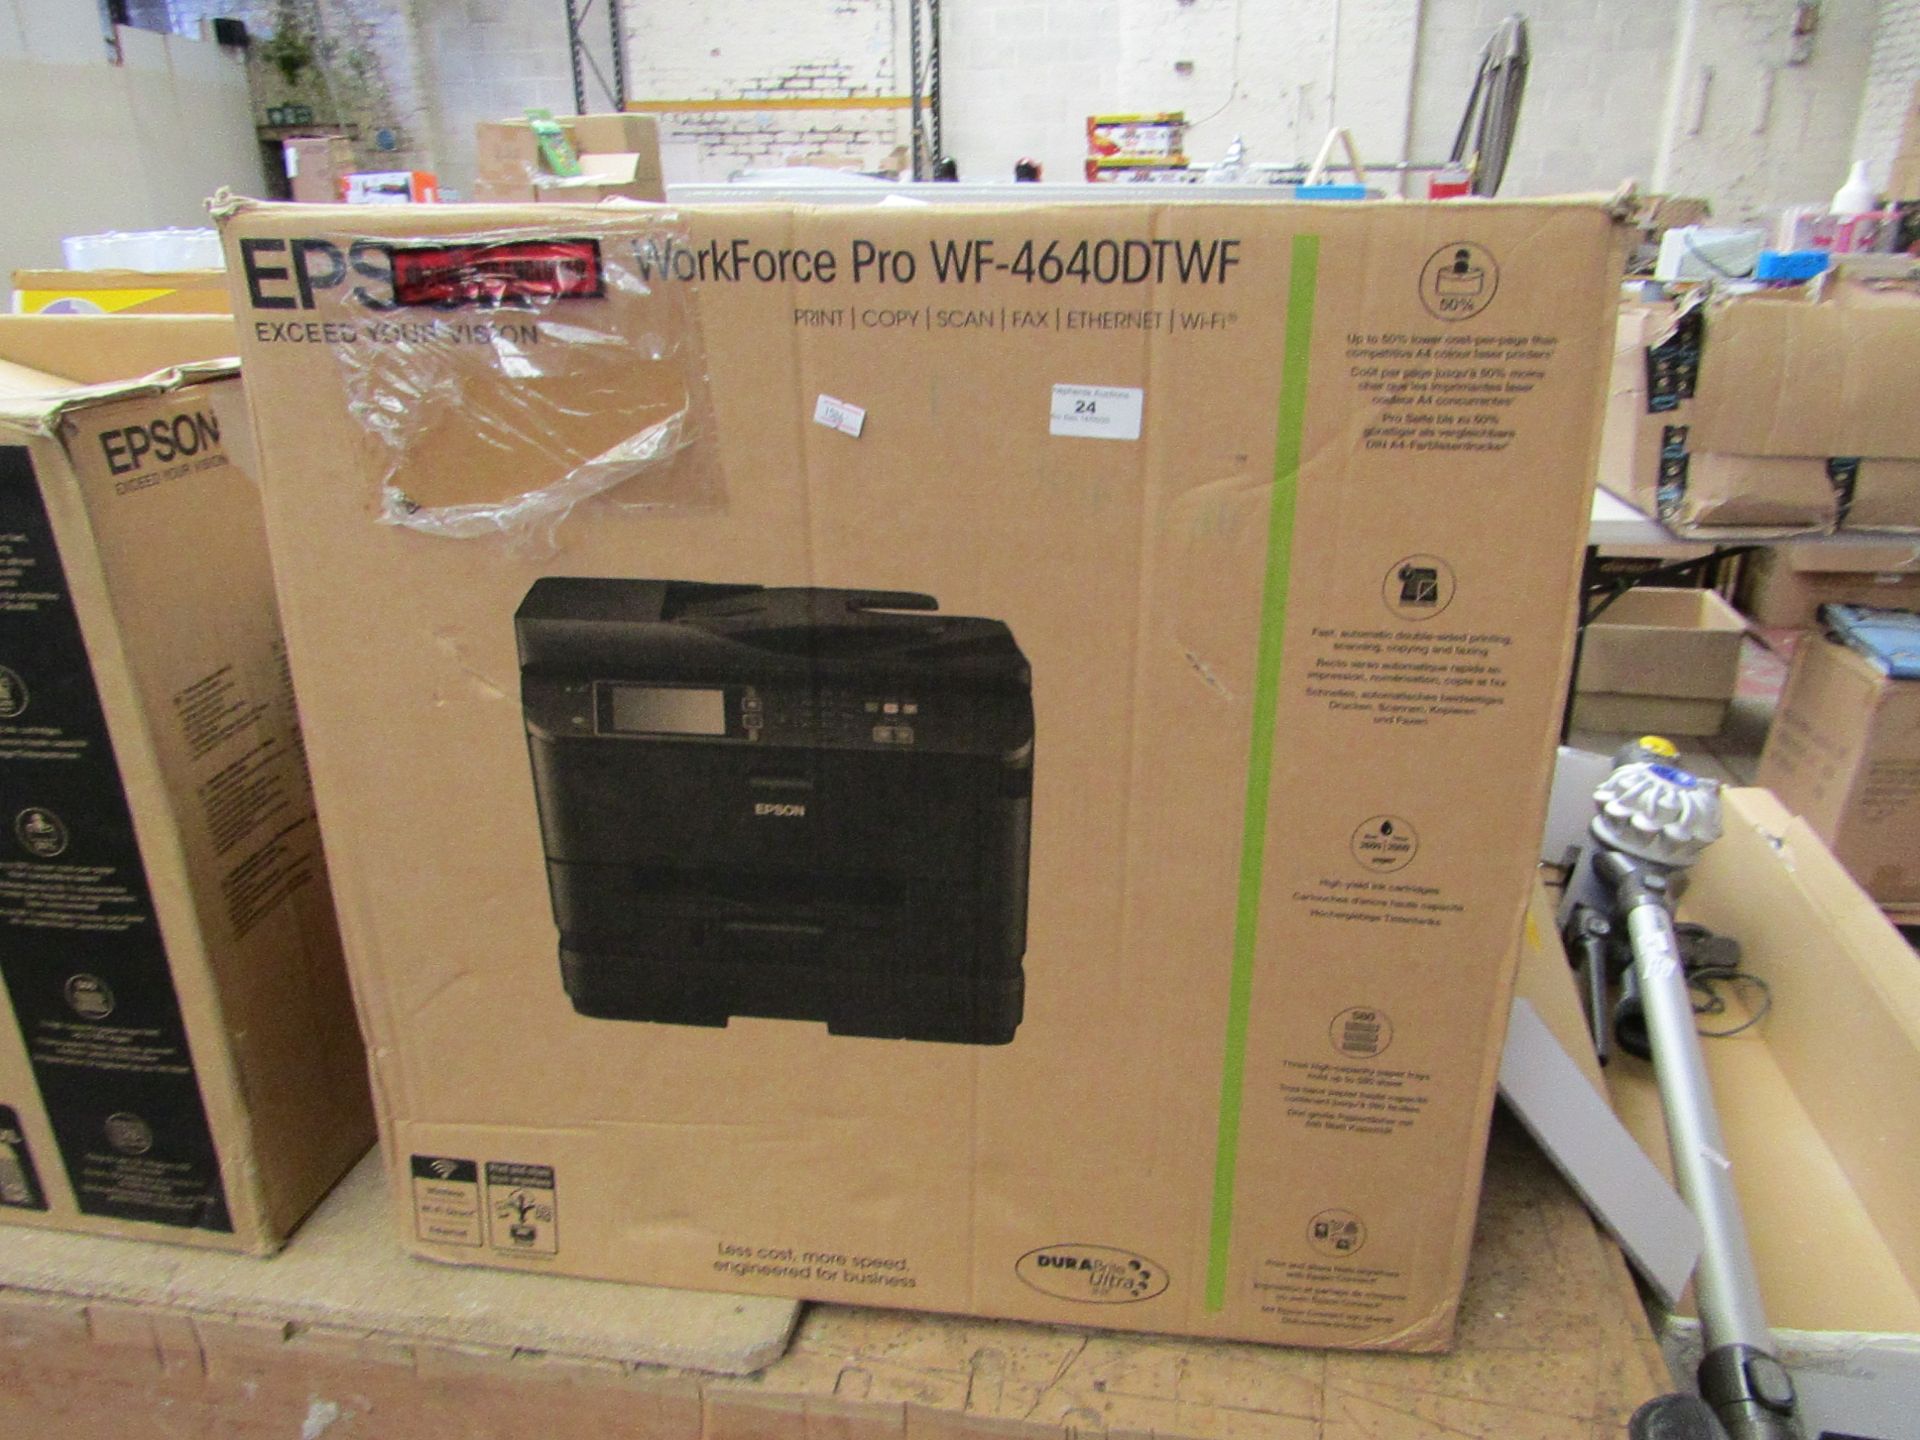 Epson workforce Pro WF4640DTWF all in one prnter, unchecked and boxed